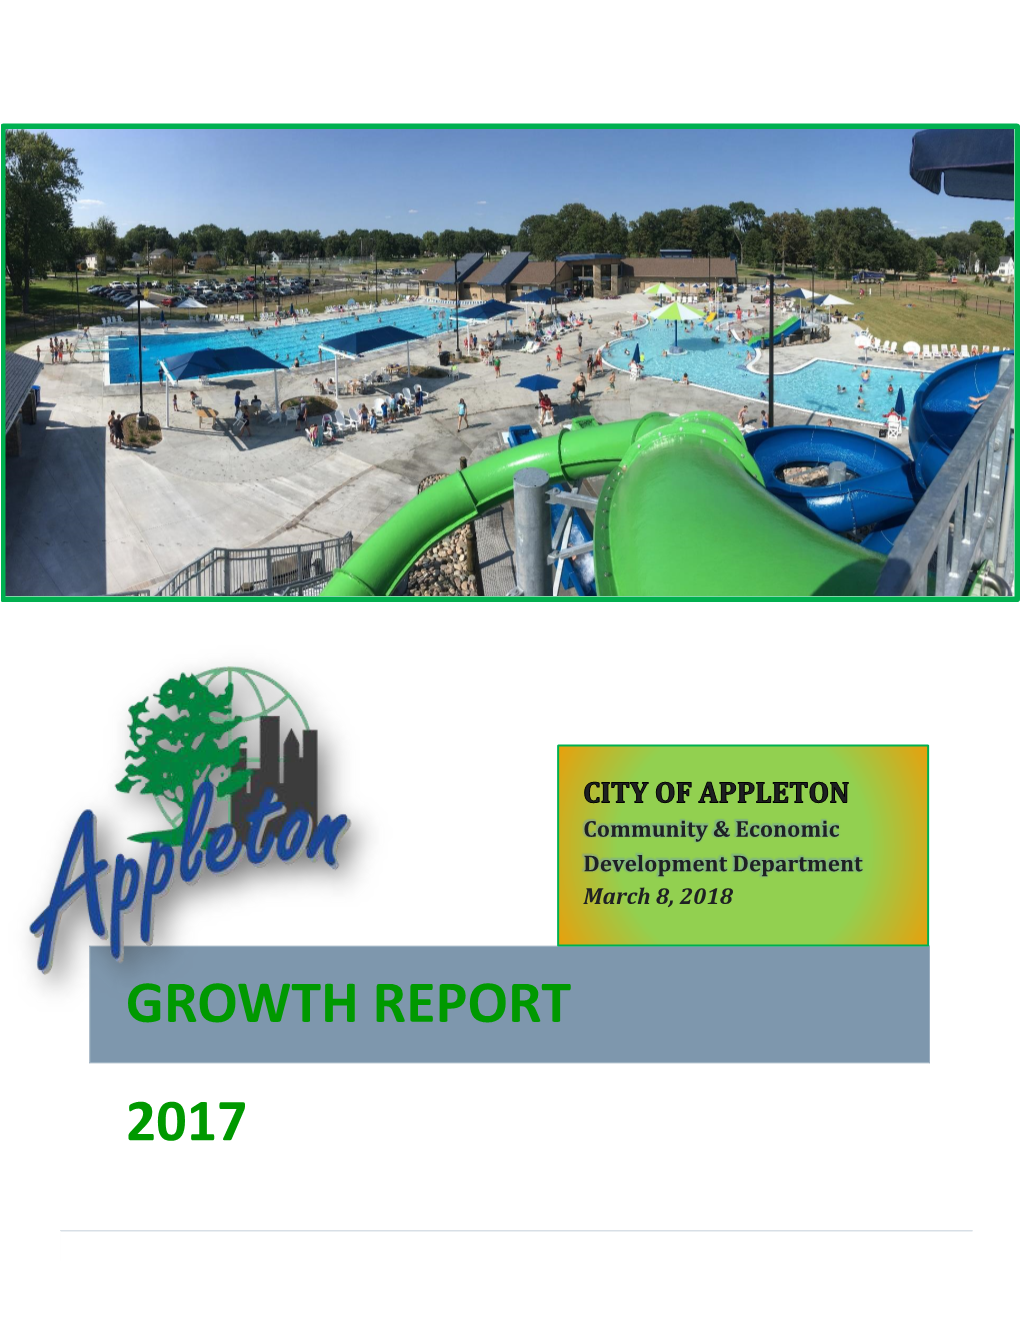 Growth Report 2017